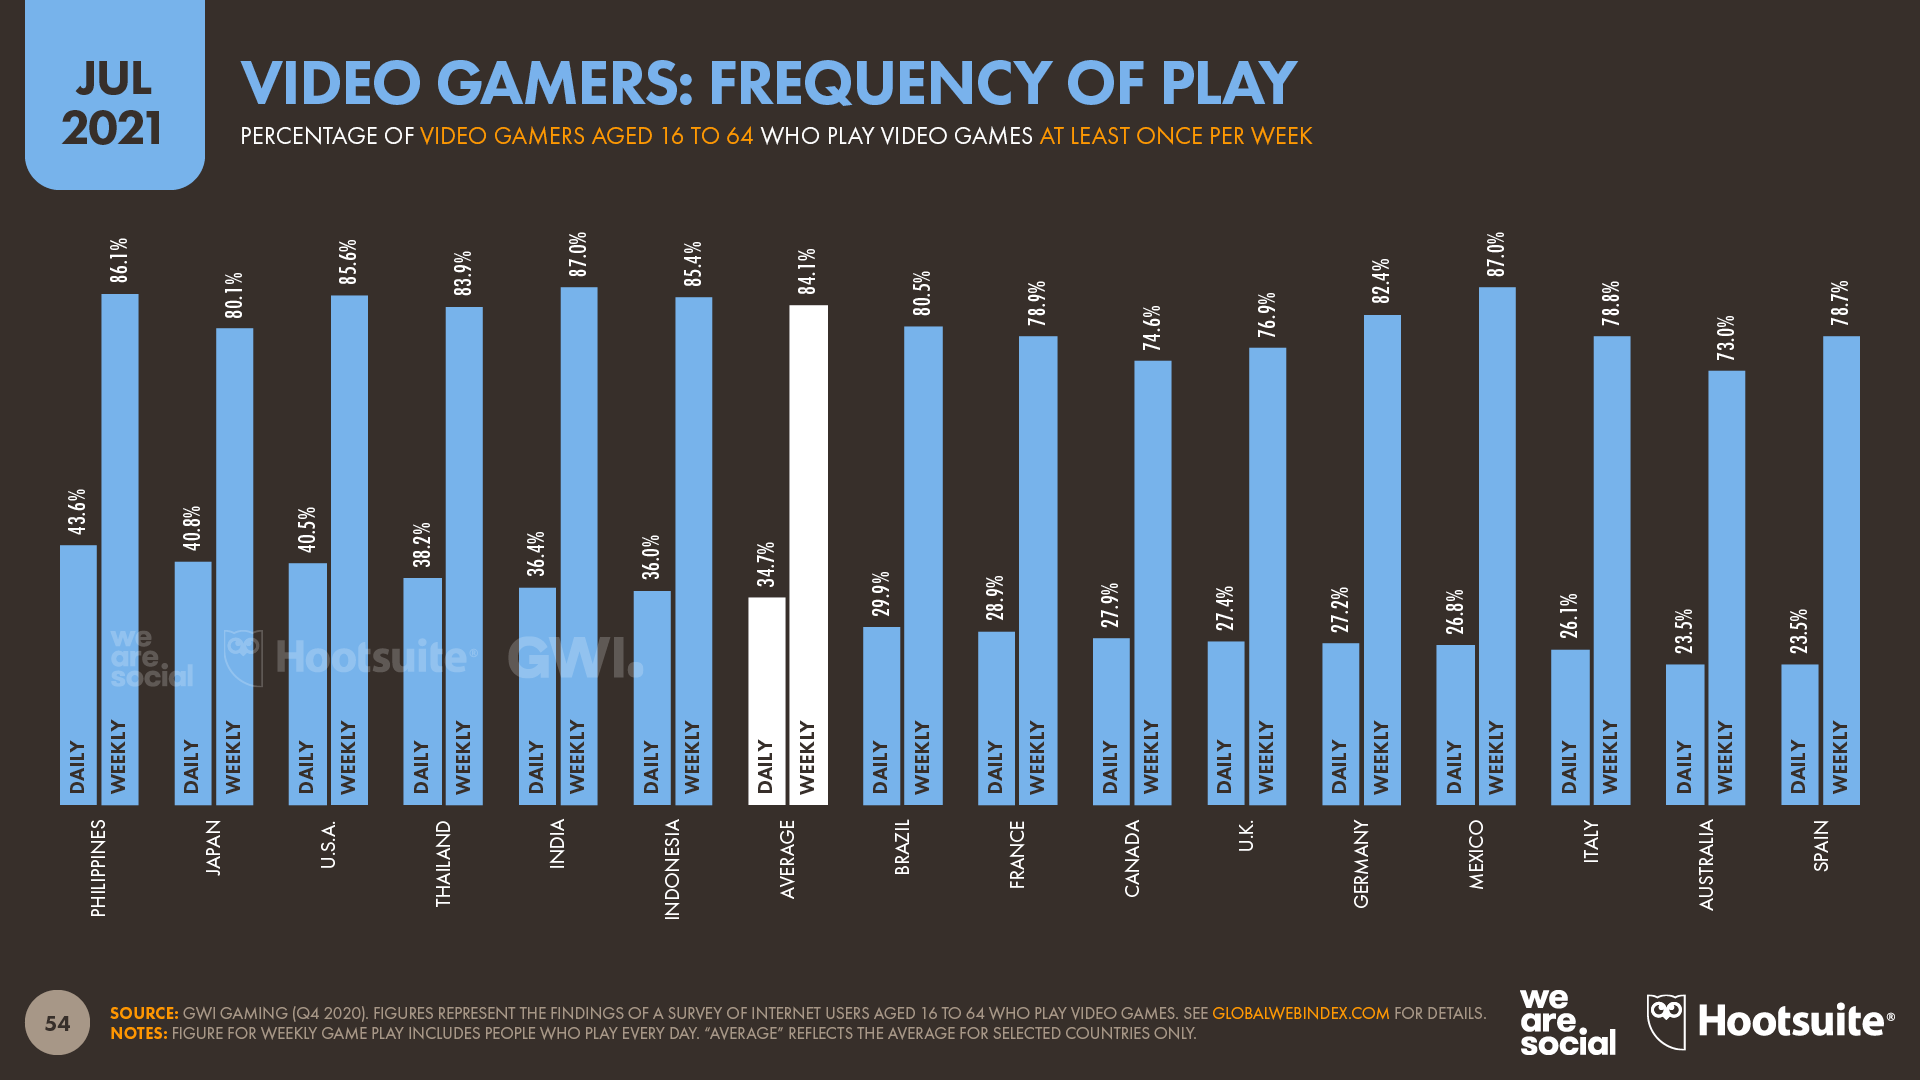 chart showing video gamers frequency of play as of July 2021